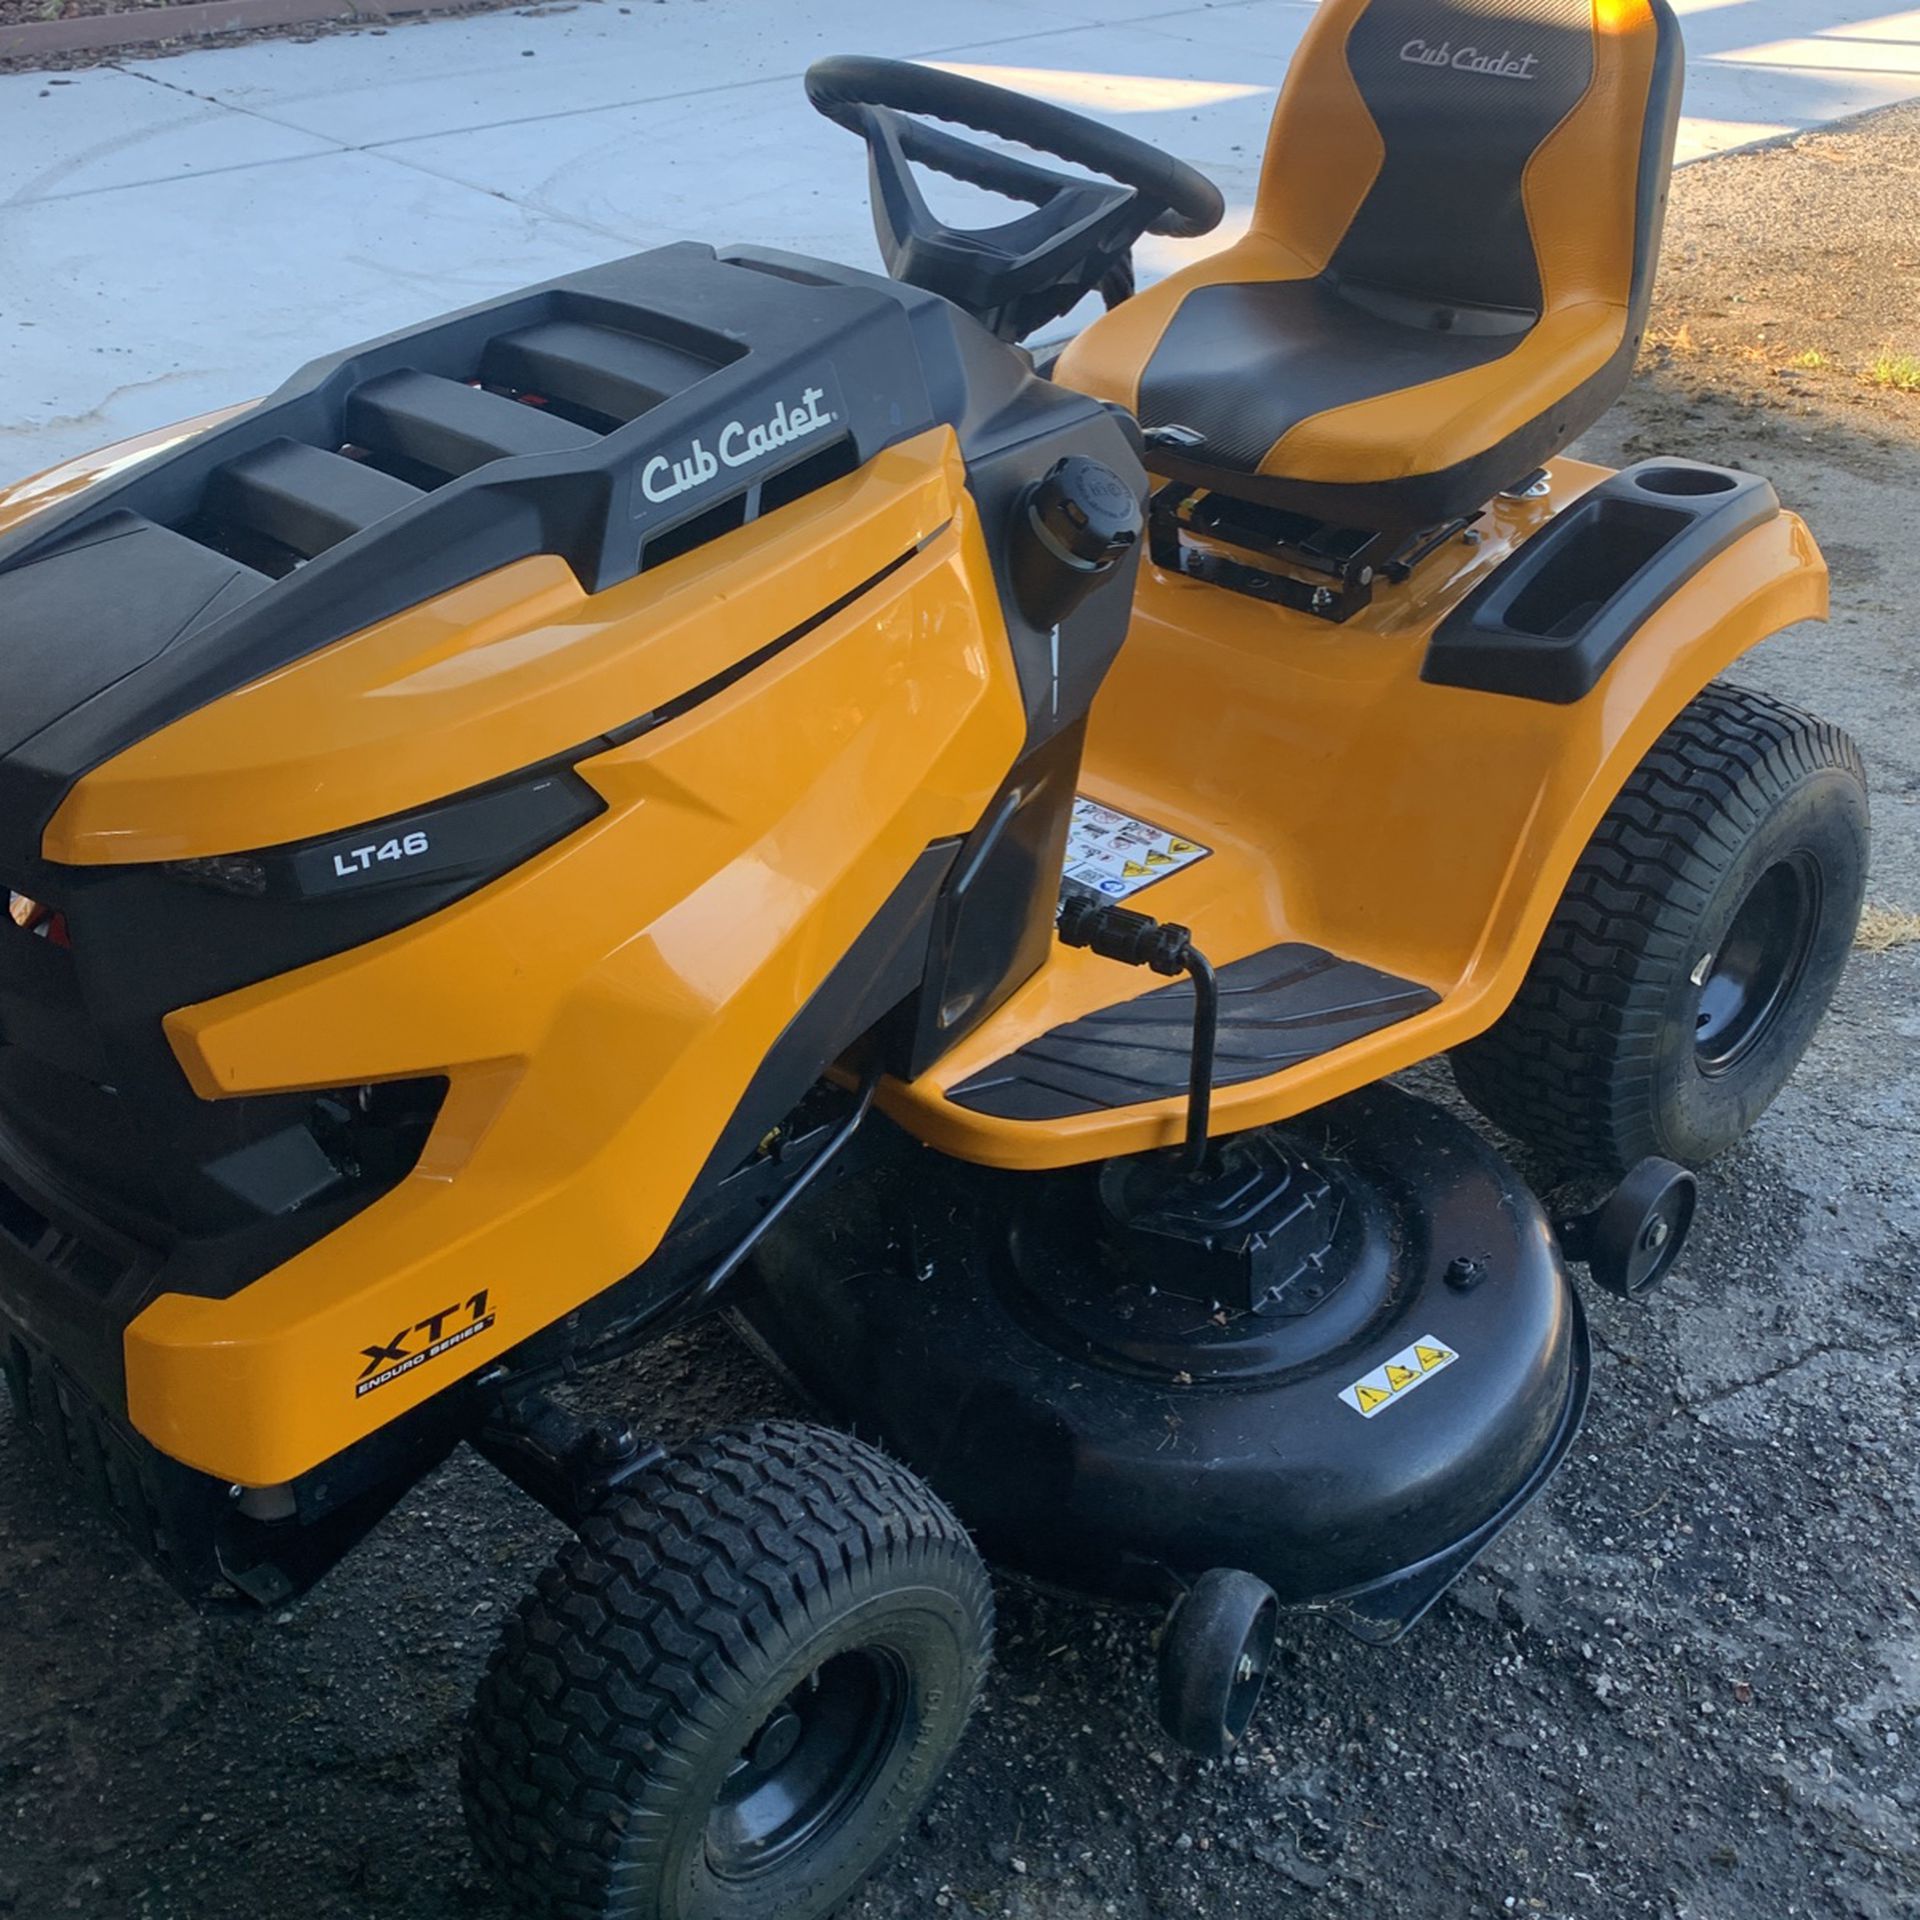 Mower Club Cadet Like New Only 12 Hours Excellent Condition Like New 23 Hp